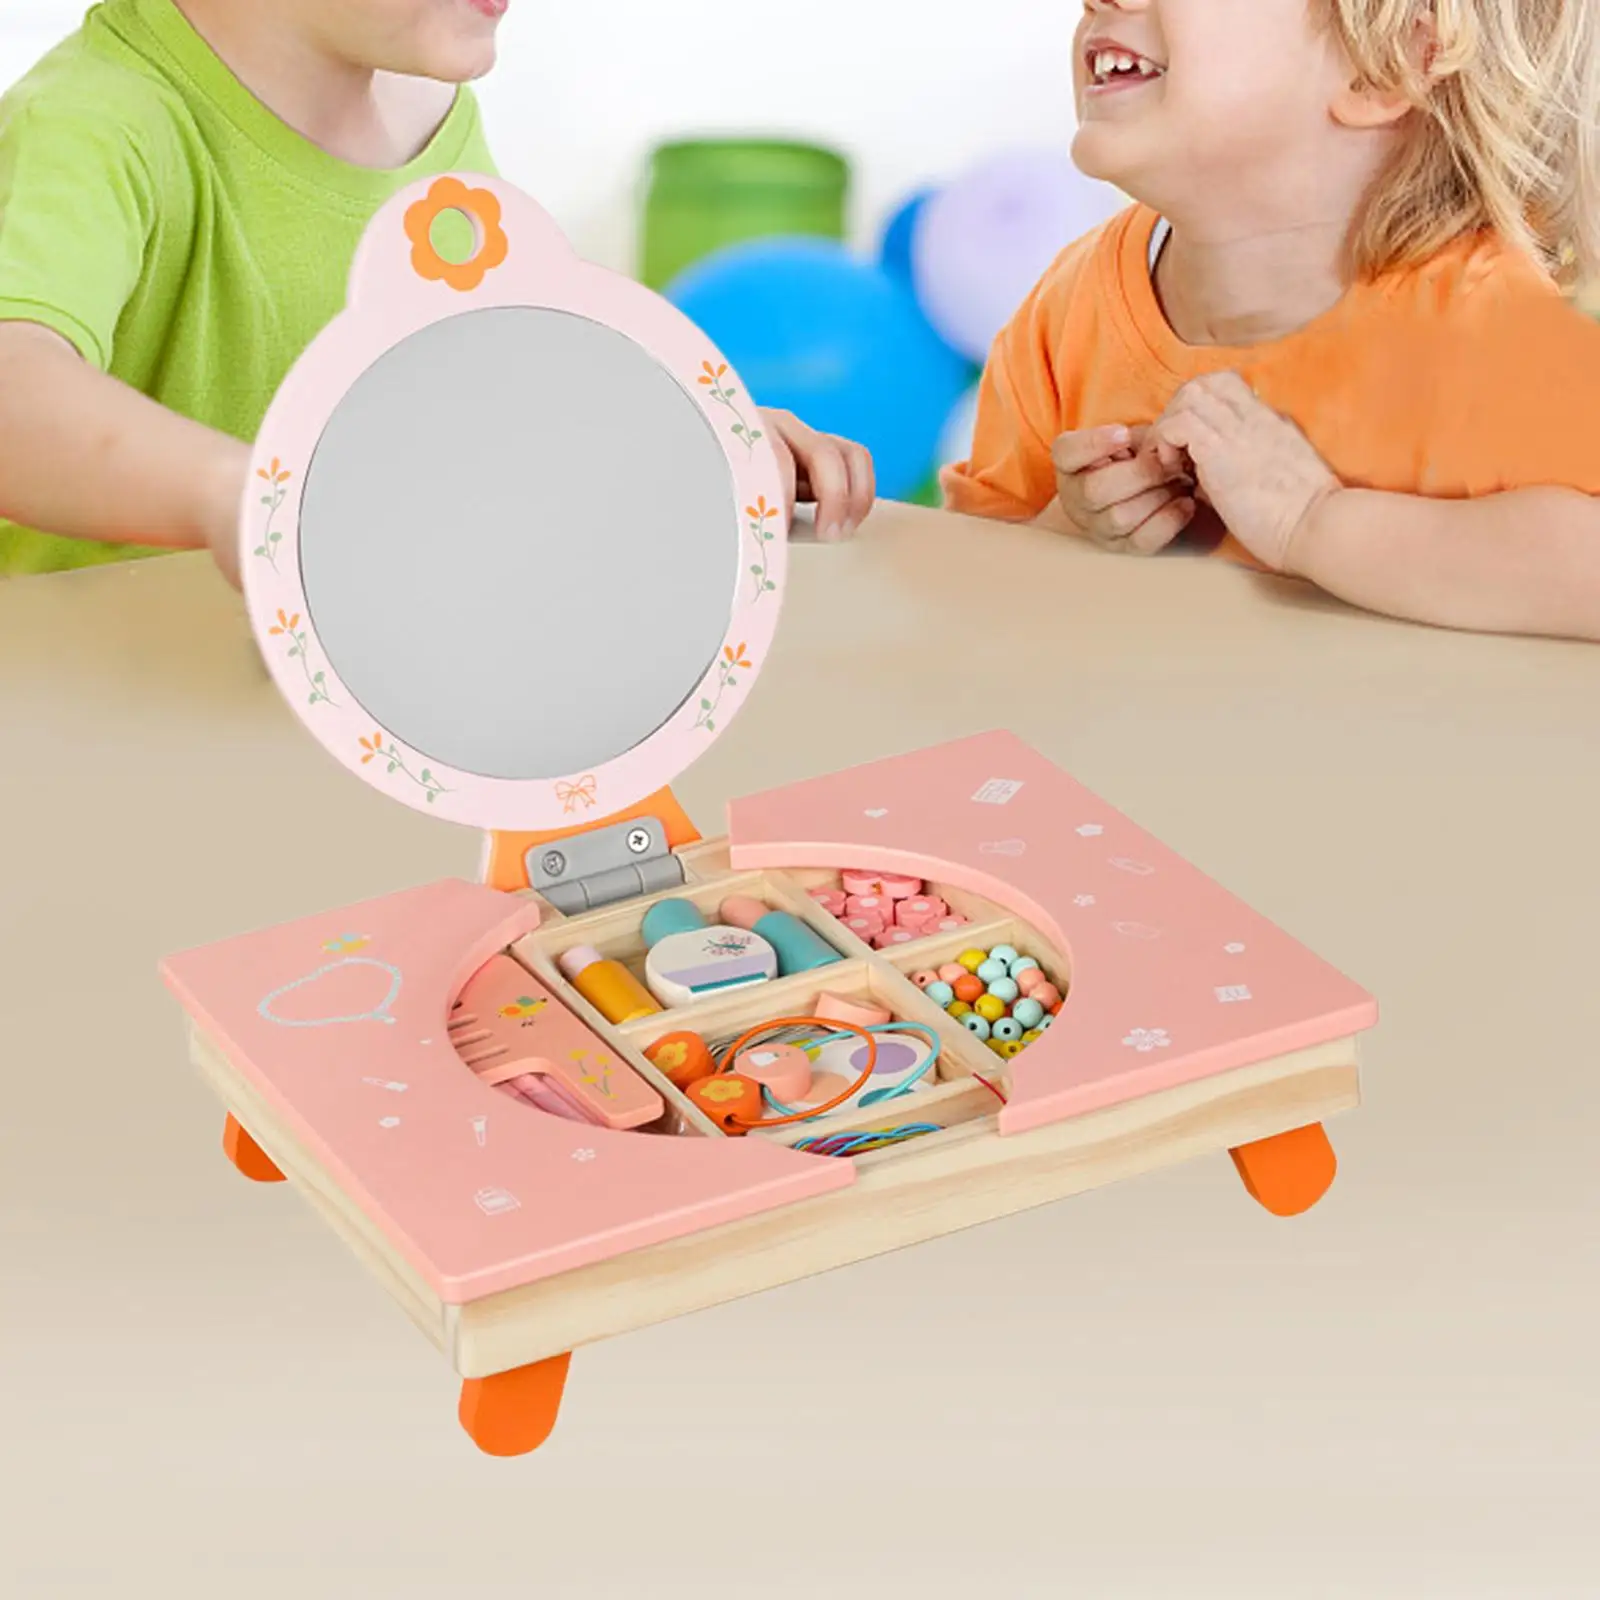 Tabletop Pretend Play Vanity Toy Girls Toys for Dress up Learning Activity Toy Tabletop Dresser Makeup Toy for Kids Girls